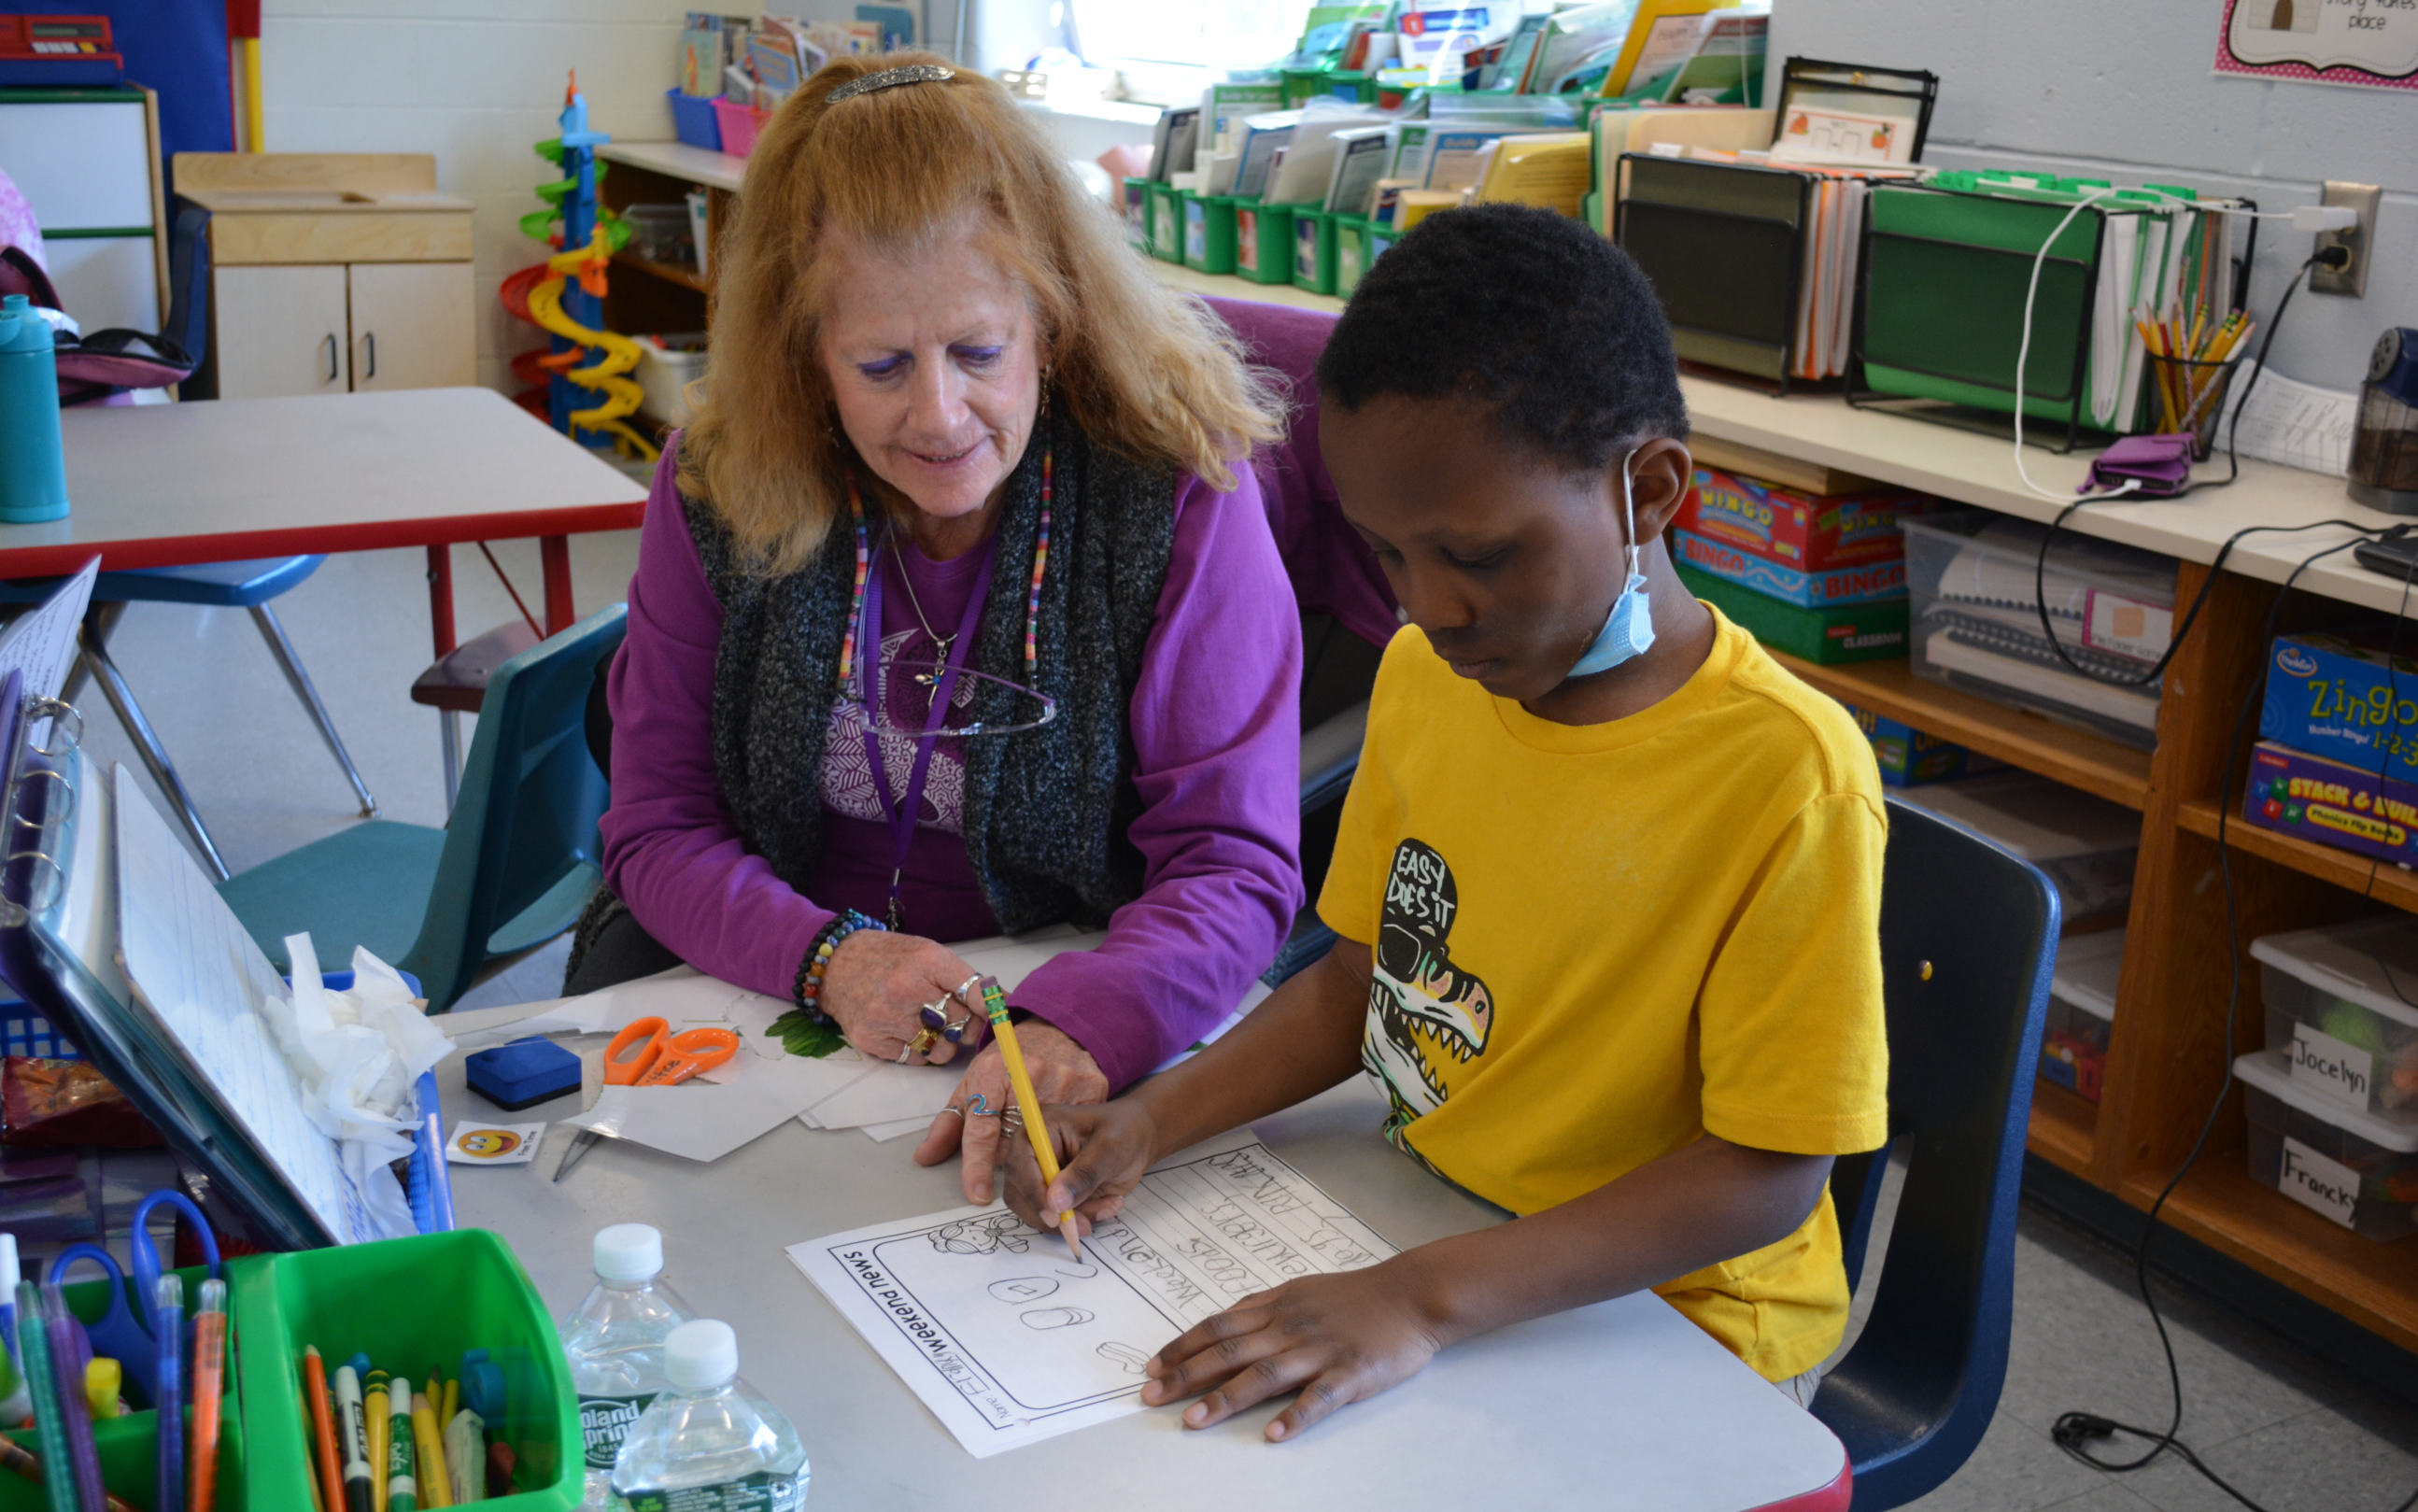 Student and teacher working together